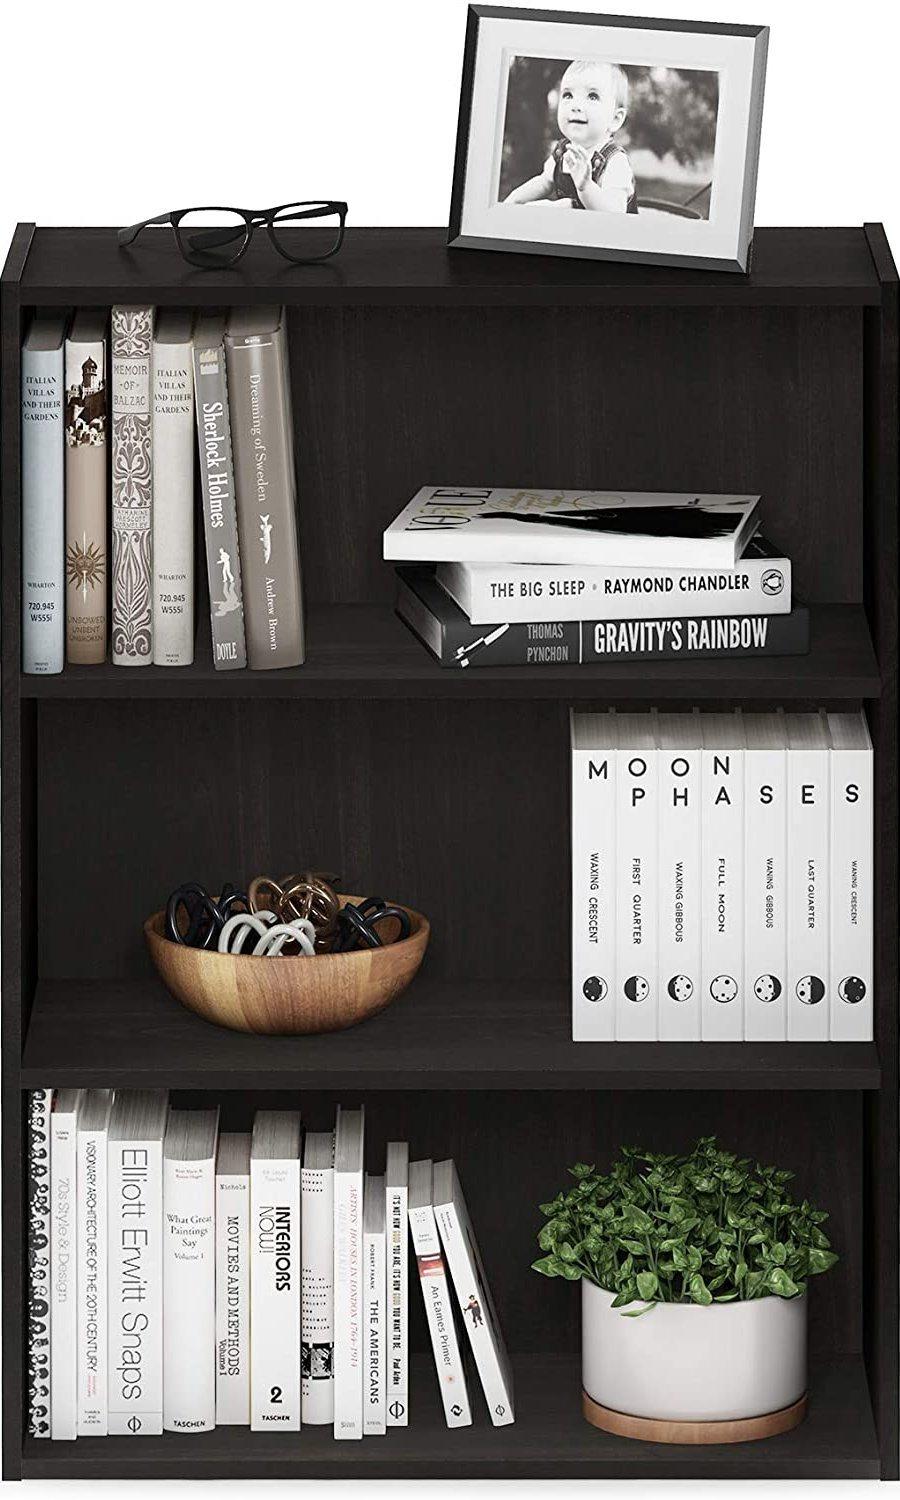 Simple Style Multifunction Wooden Bookcase